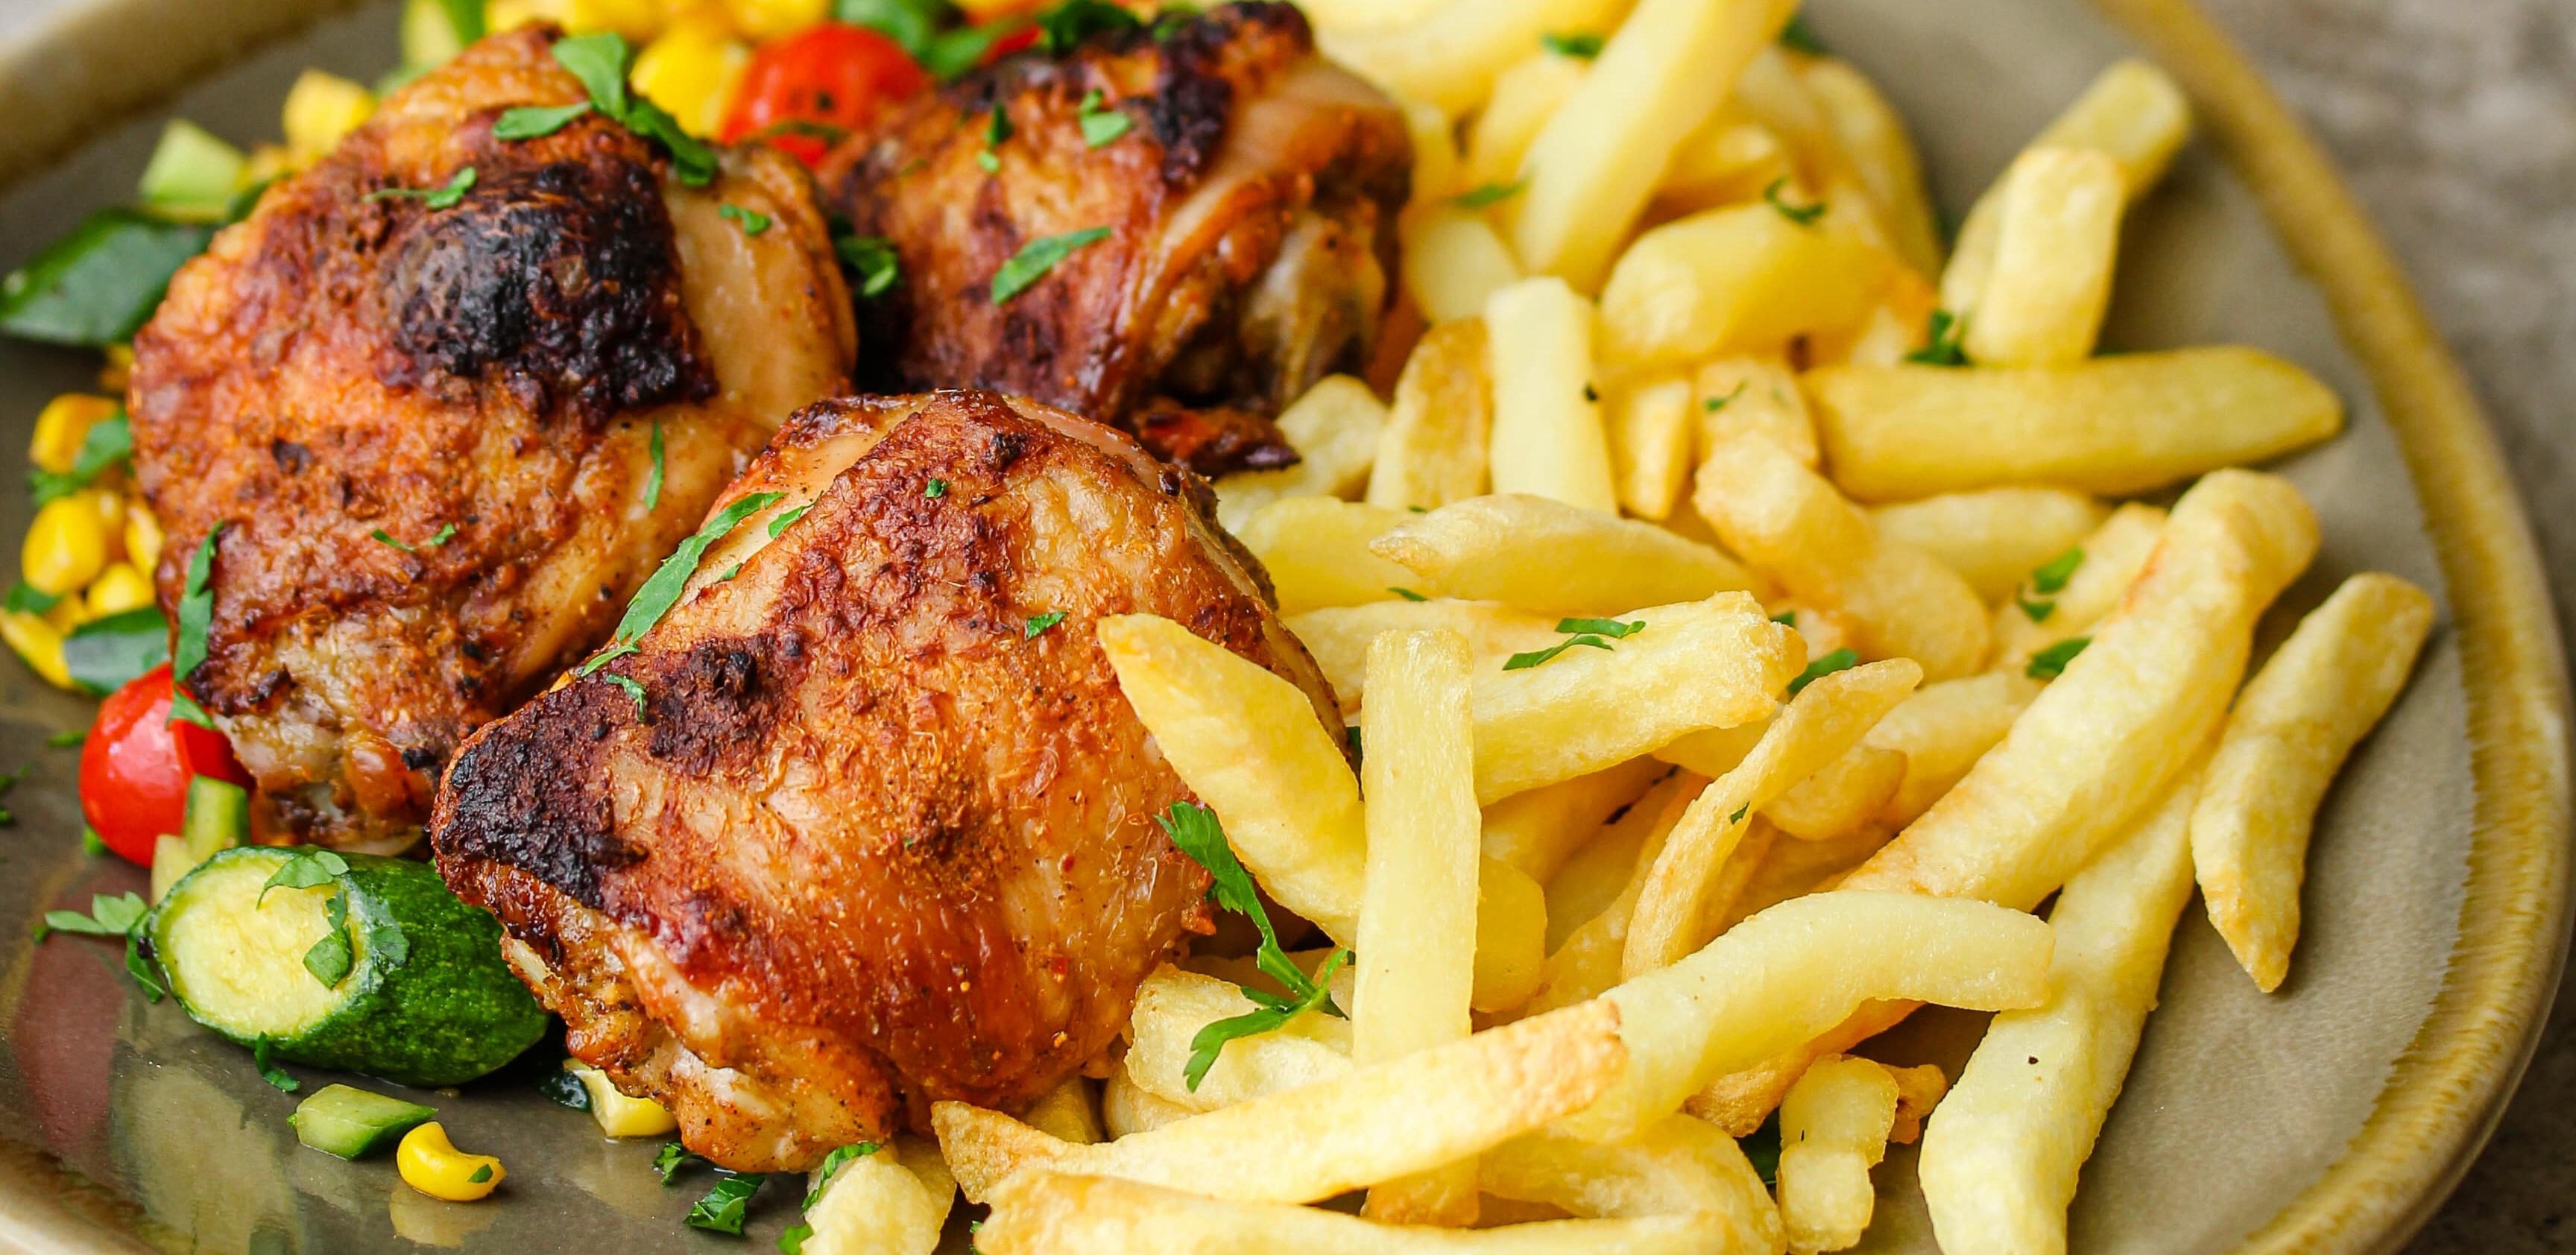 Grilled Chicken Thighs with Fries